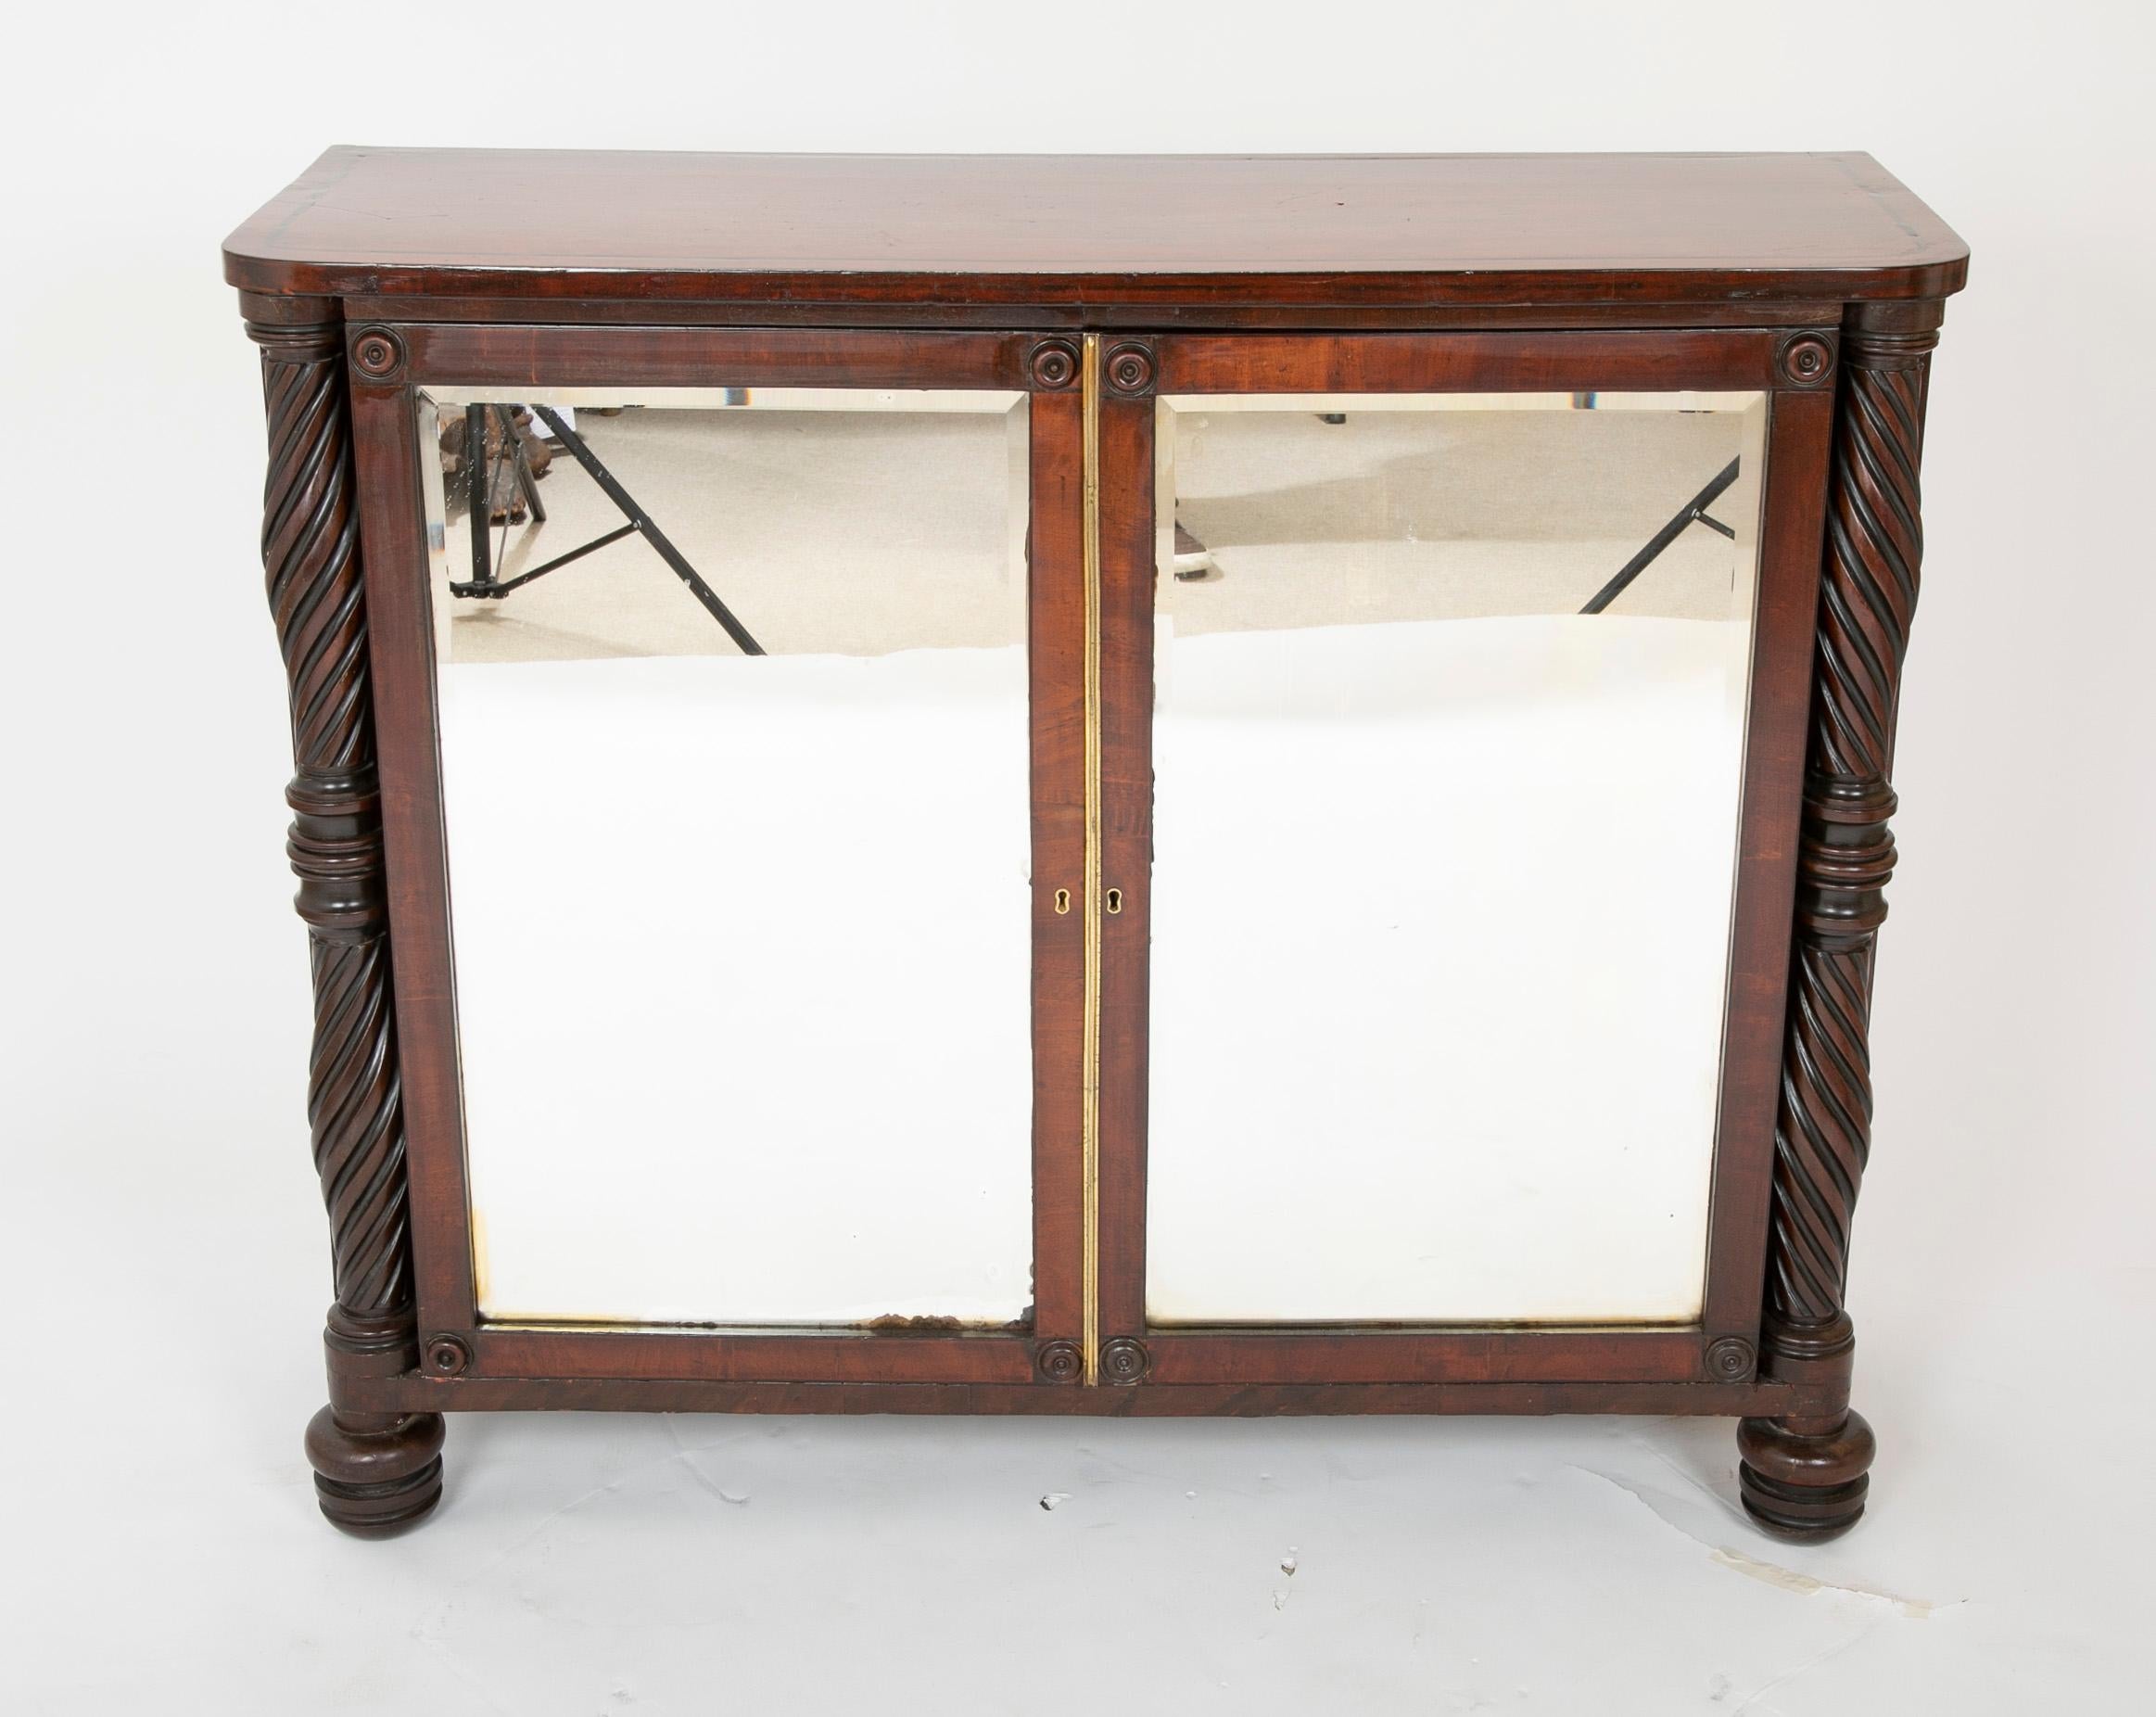 A Regency mahogany mirror door credenza with rope turned corner columns, turned feet & rondels having interior shelves and silver drawer, circa 1820.